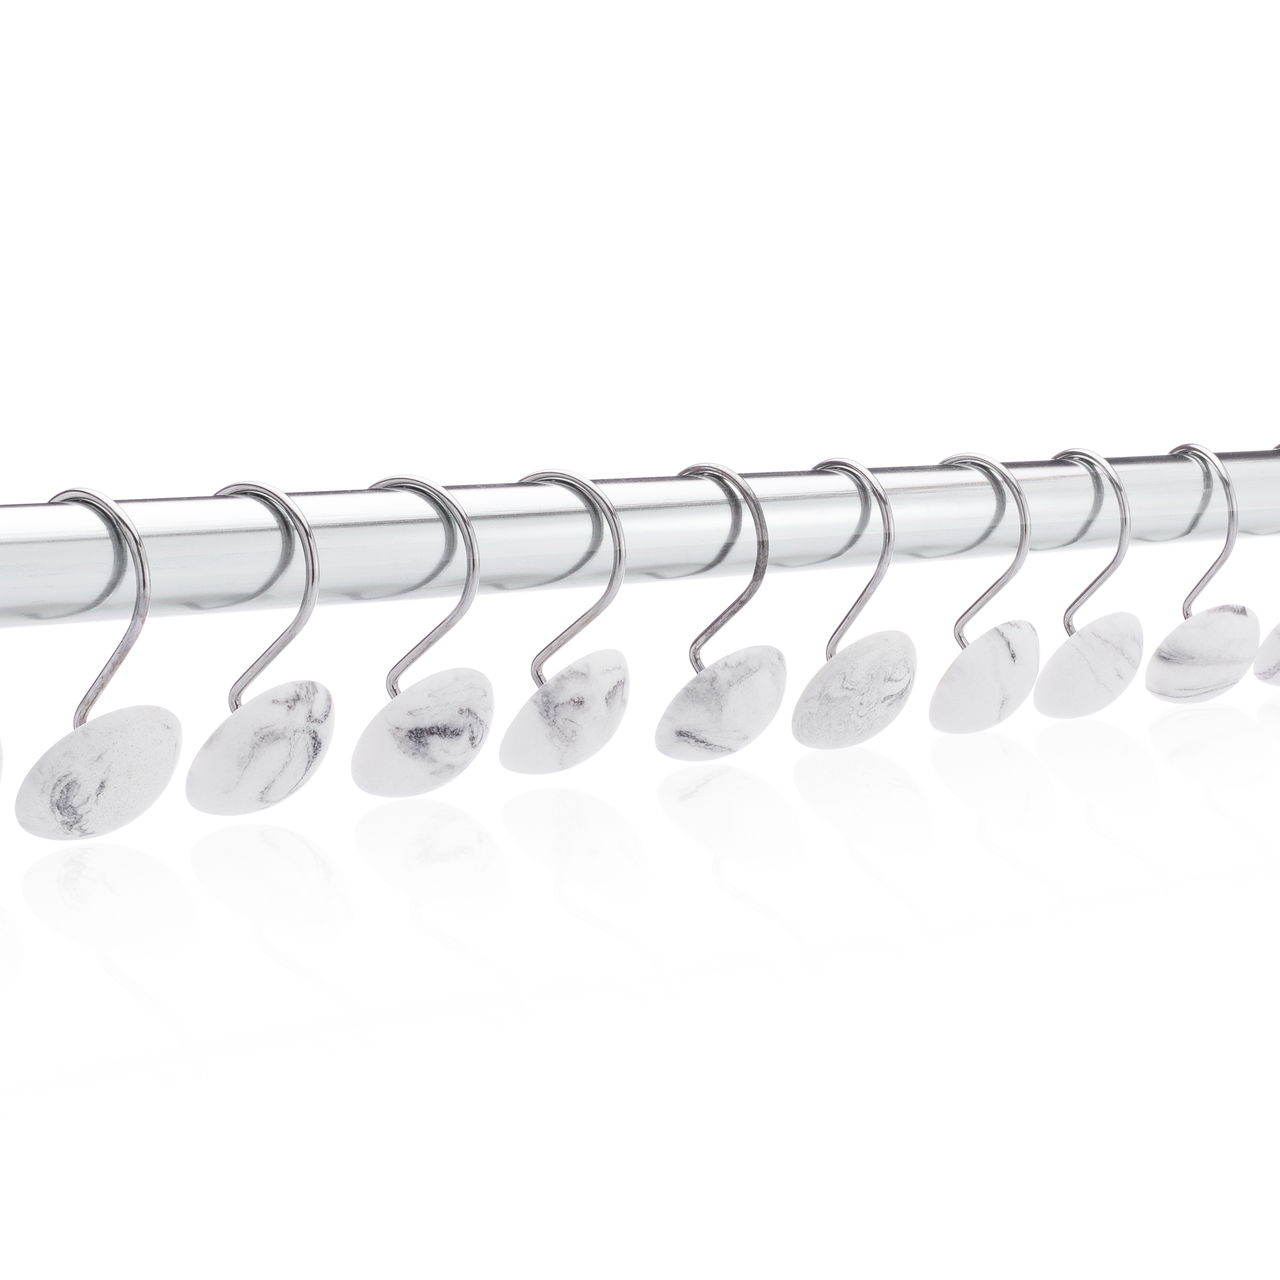  Essentra Home White 12-Piece Shower Curtain Hook Set Features  Rust Free Chrome Hook, Blanc Collection : Home & Kitchen